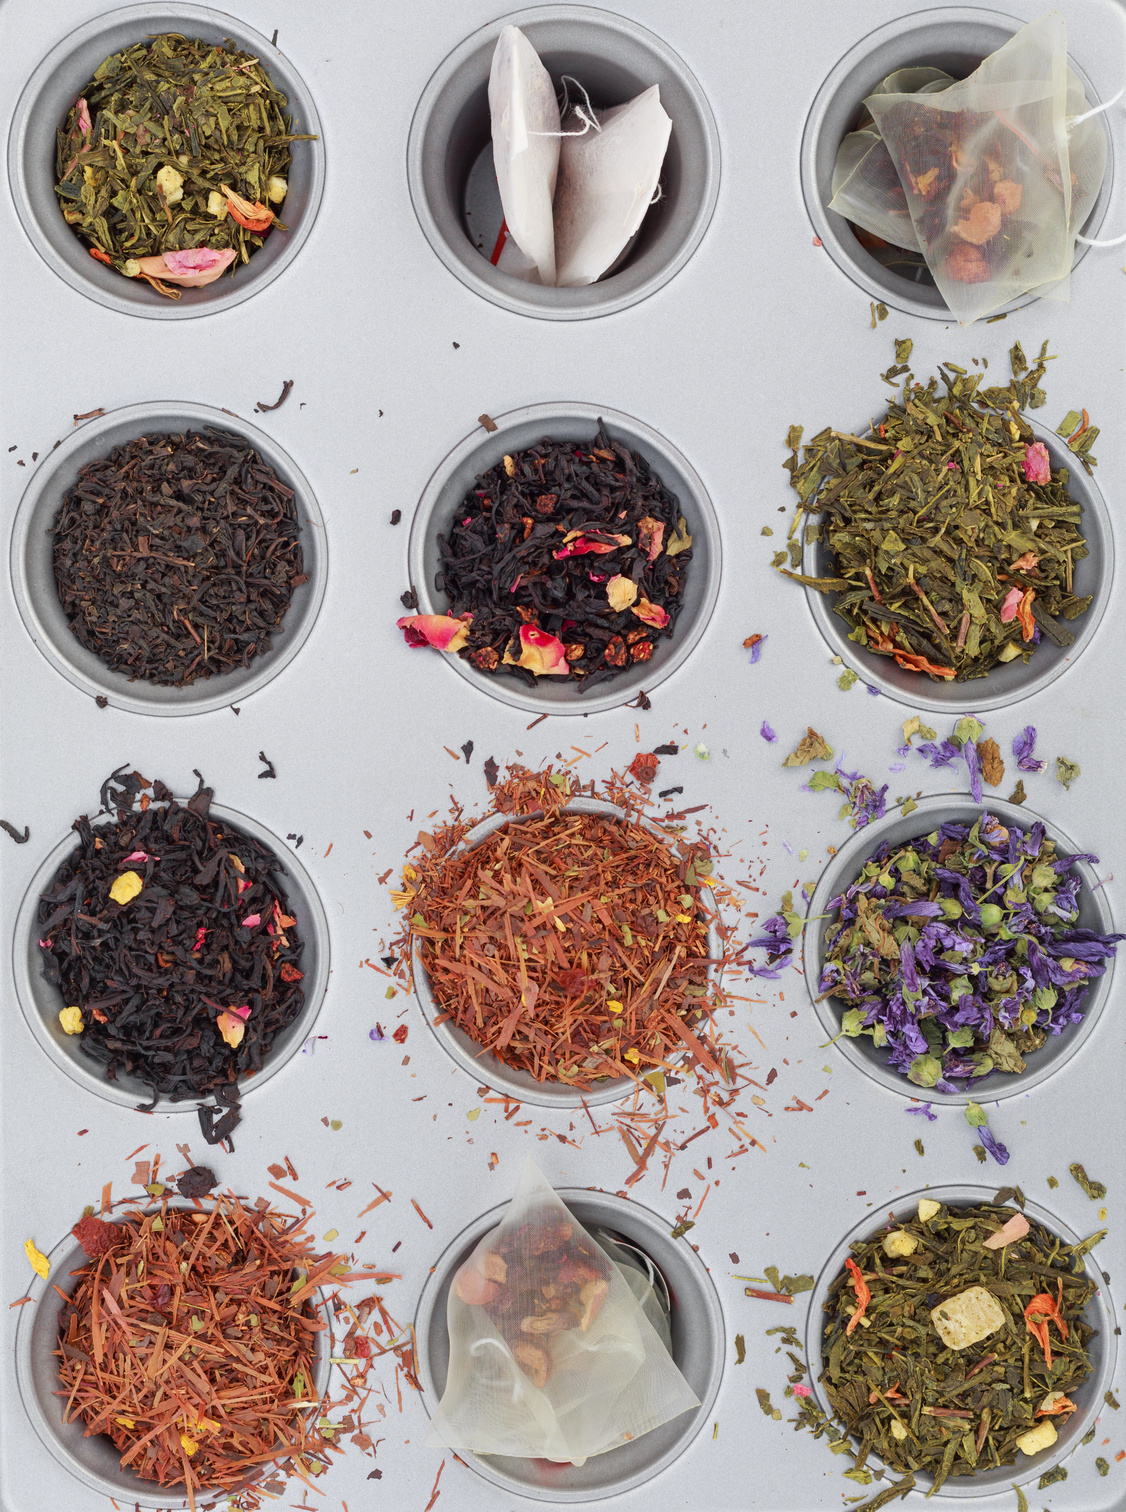 Herbal and Floral Teas in Muffin Tins